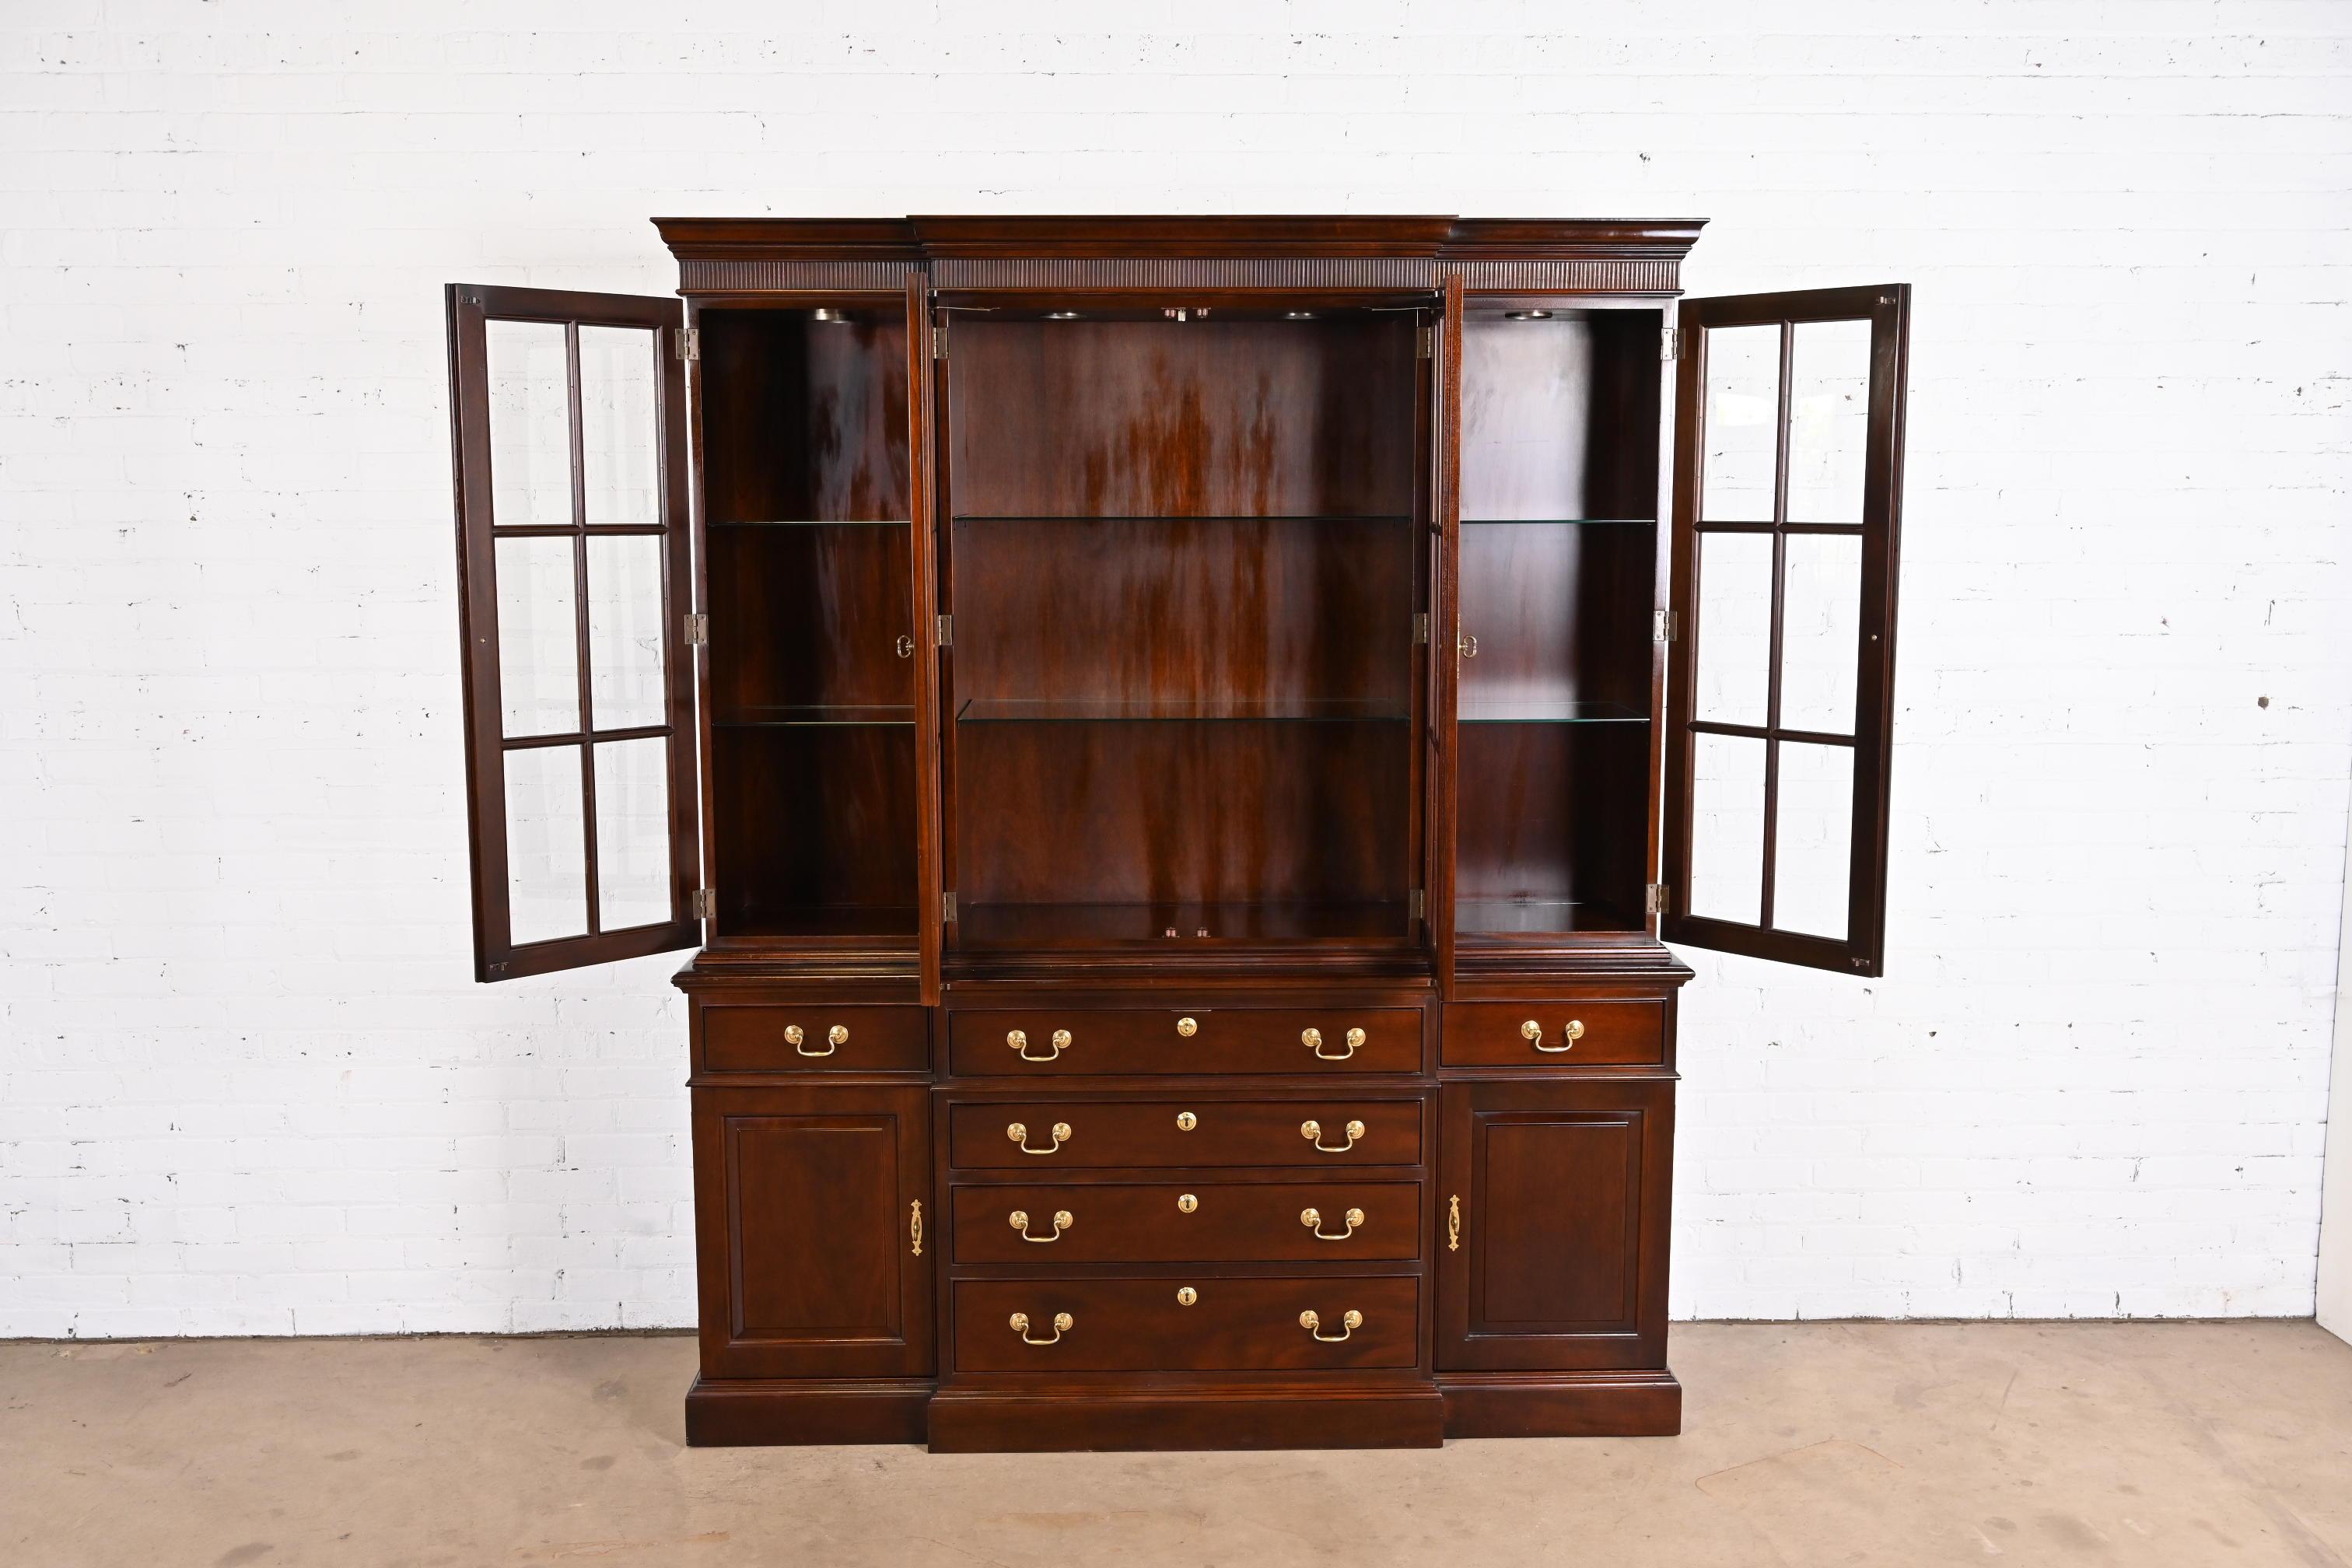 Stickley Georgian Cherry Wood Lighted Breakfront Bookcase Cabinet 5